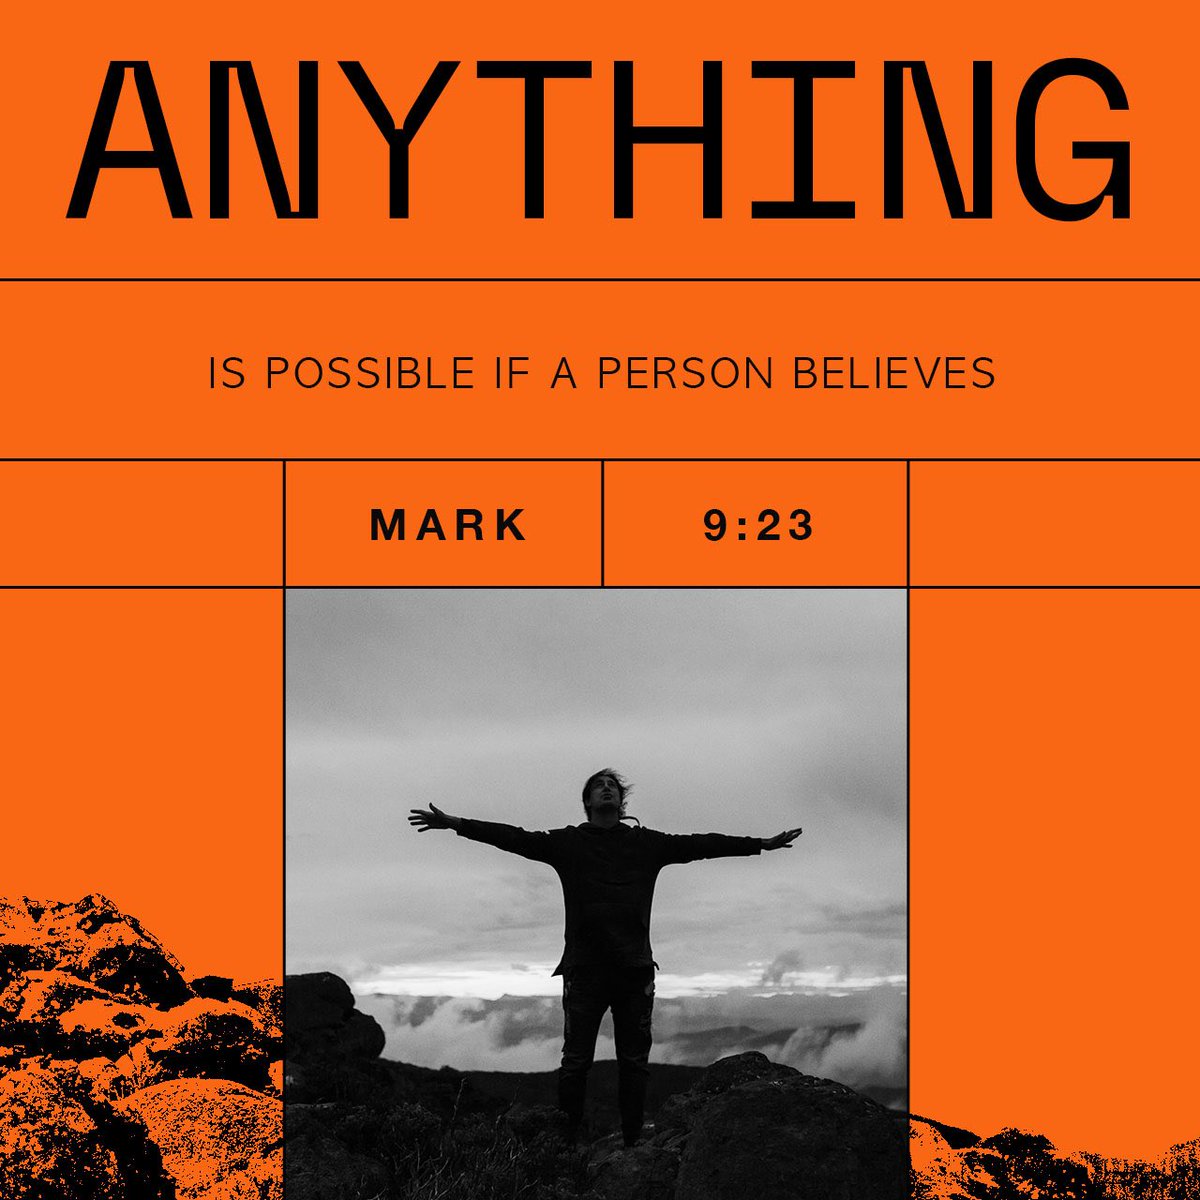 “‘If you can’?” said Jesus. “Everything is possible for one who believes.” Mark 9:23